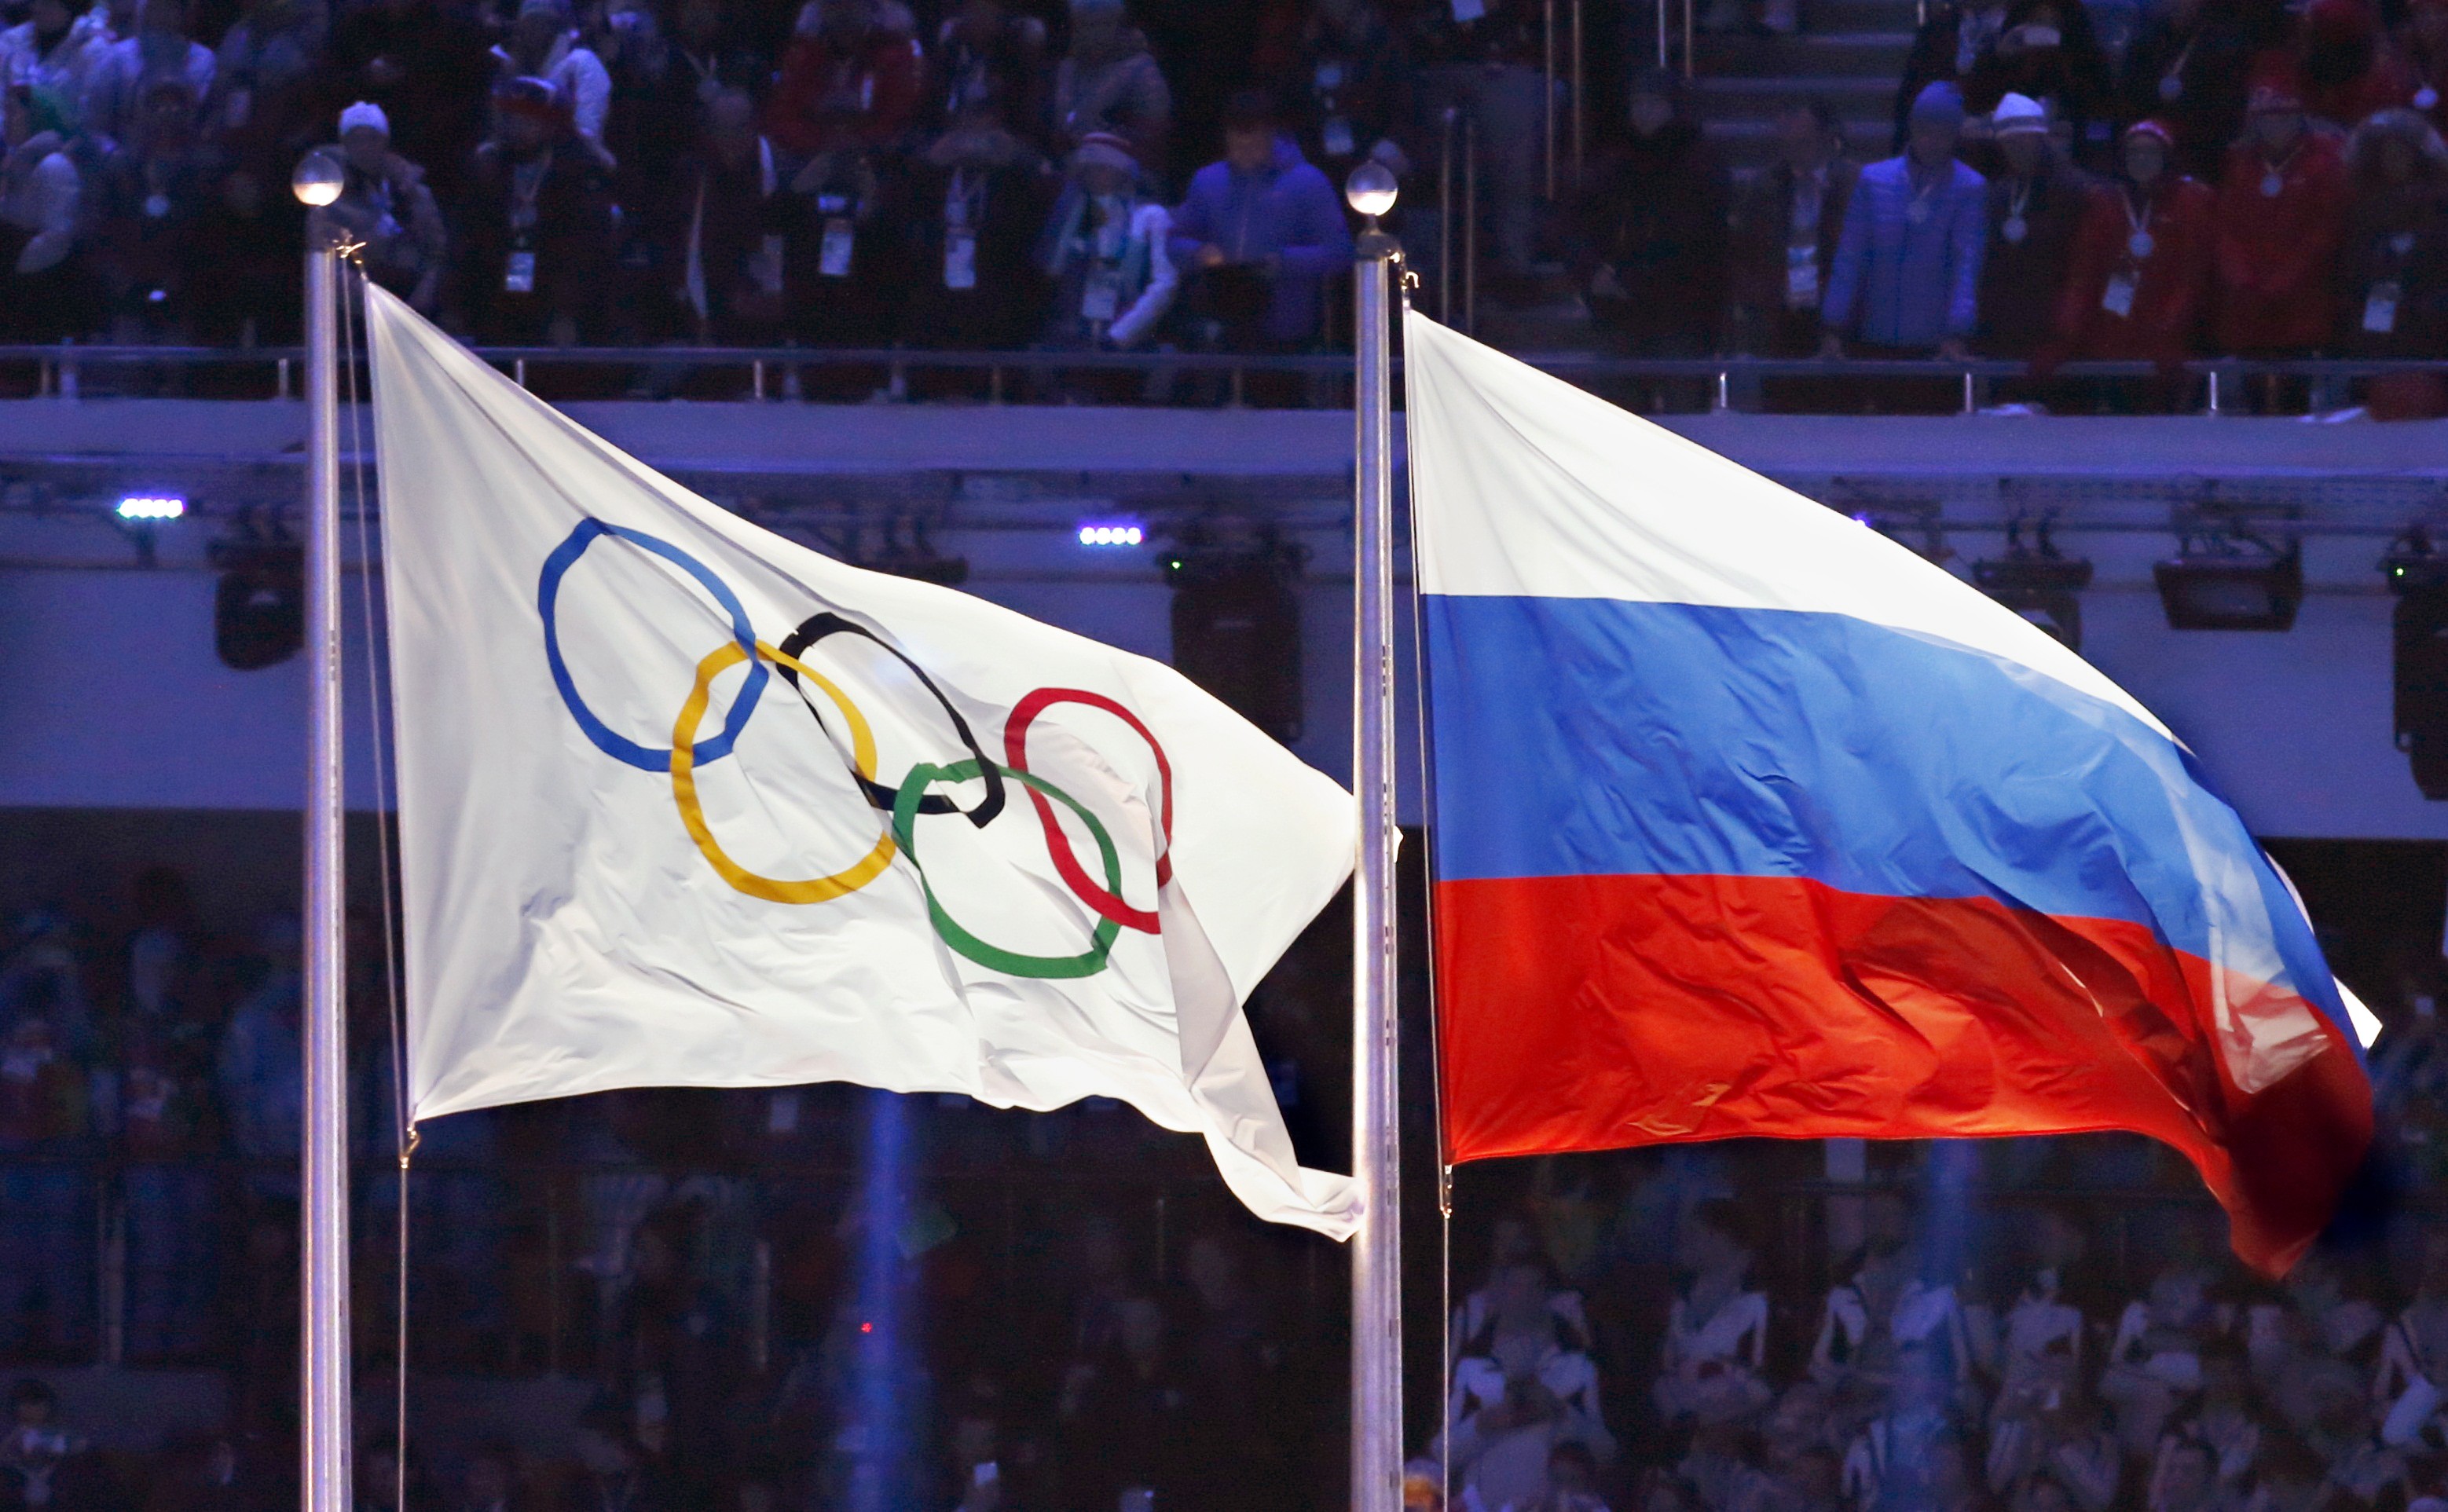 The Olympic flag flying alongside the Russian flag at the 2014 Winter Olympics opening ceremony in Sochi. Photo: Kyodo